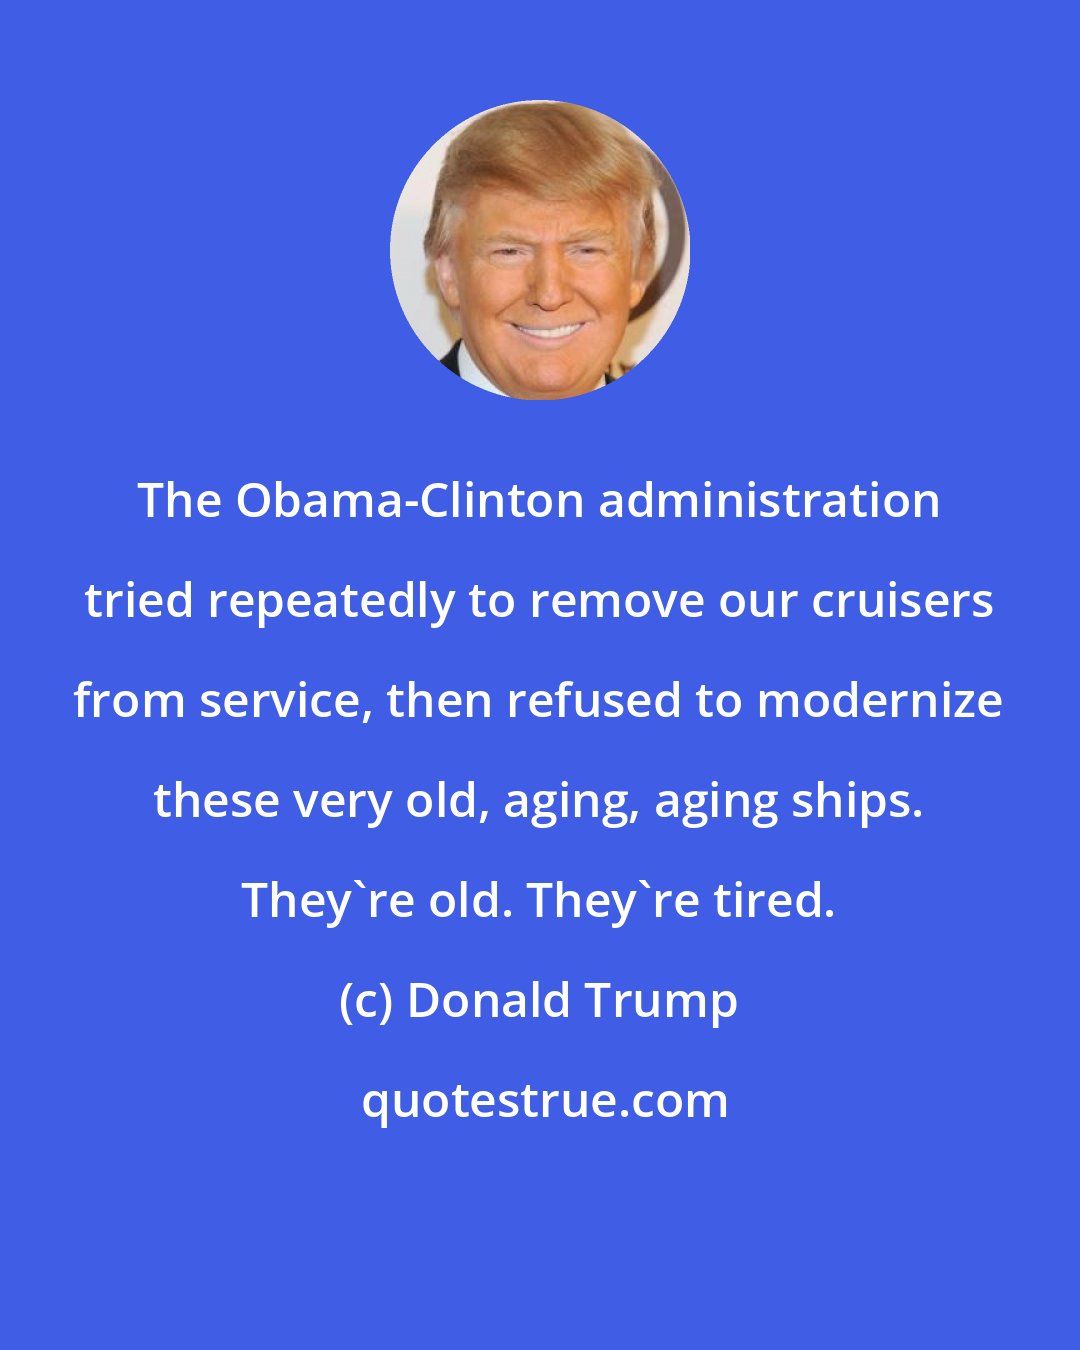 Donald Trump: The Obama-Clinton administration tried repeatedly to remove our cruisers from service, then refused to modernize these very old, aging, aging ships. They're old. They're tired.